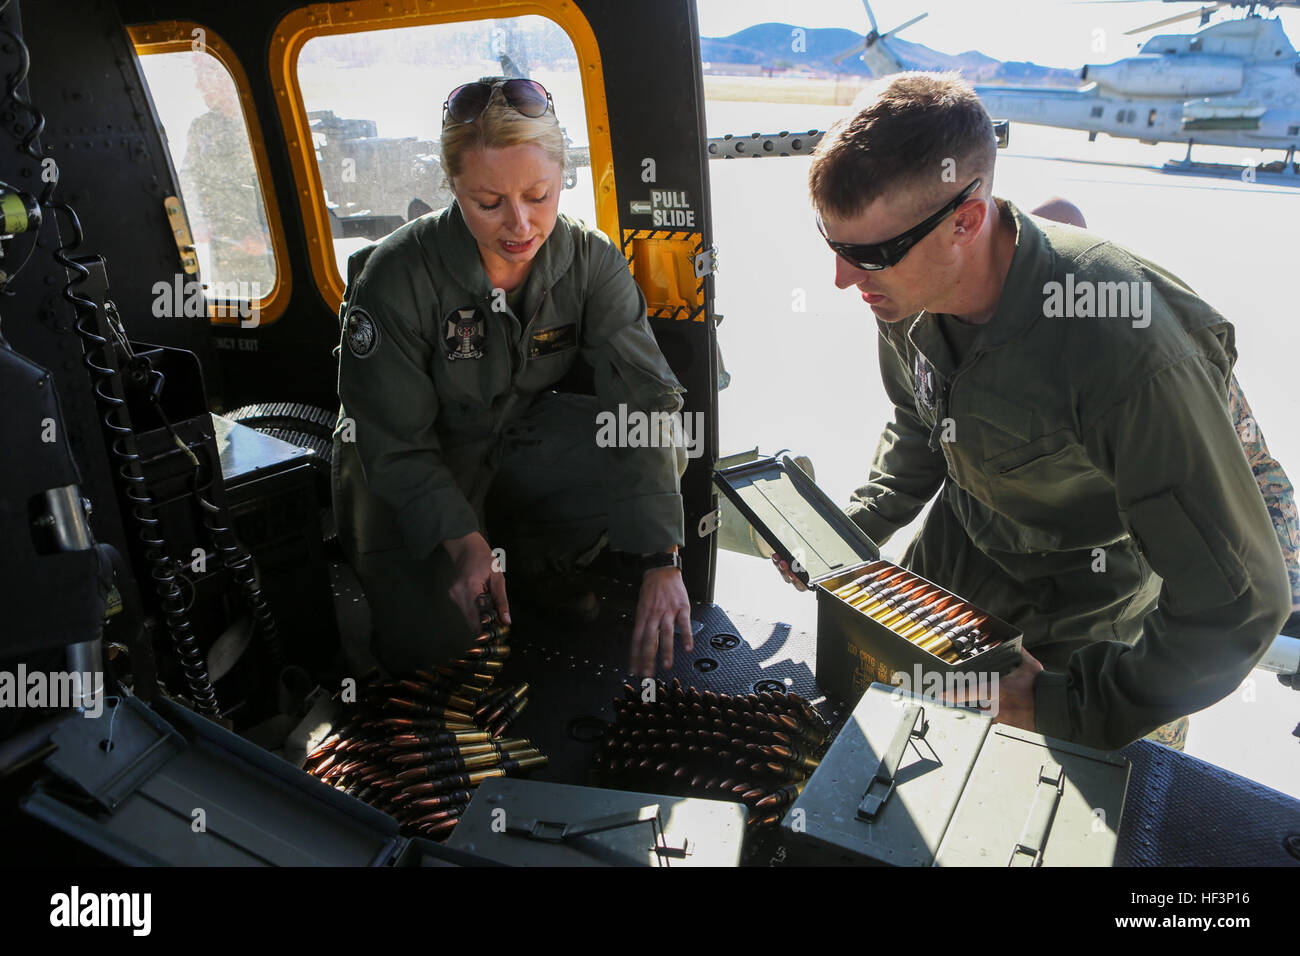 Sgt. Elizabeth M. Azcuenaga explains to 1st. Lt. James E. Shelton how to properly feed GAU-21/A .50 Caliber Machine Gun ammunition in order to reduce double feeds and jams in preparation for a Joint Terminal Attack Control training scenario Dec. 15, at Marine Corps Base Camp Pendleton, Calif. Azcuenaga, a Donnelly, Idaho, native, is a weapons and tactics instructor with Marine Light Attack Helicopter Squadron 169, Marine Aircraft Group 39, 3rd Marine Aircraft Wing. Shelton, a San Luis Obispo, California, native, is an aerial observer with HMLA-169, MAG 39, 3rd MAW. (Marine Corps photo by Cpl.  Stock Photo